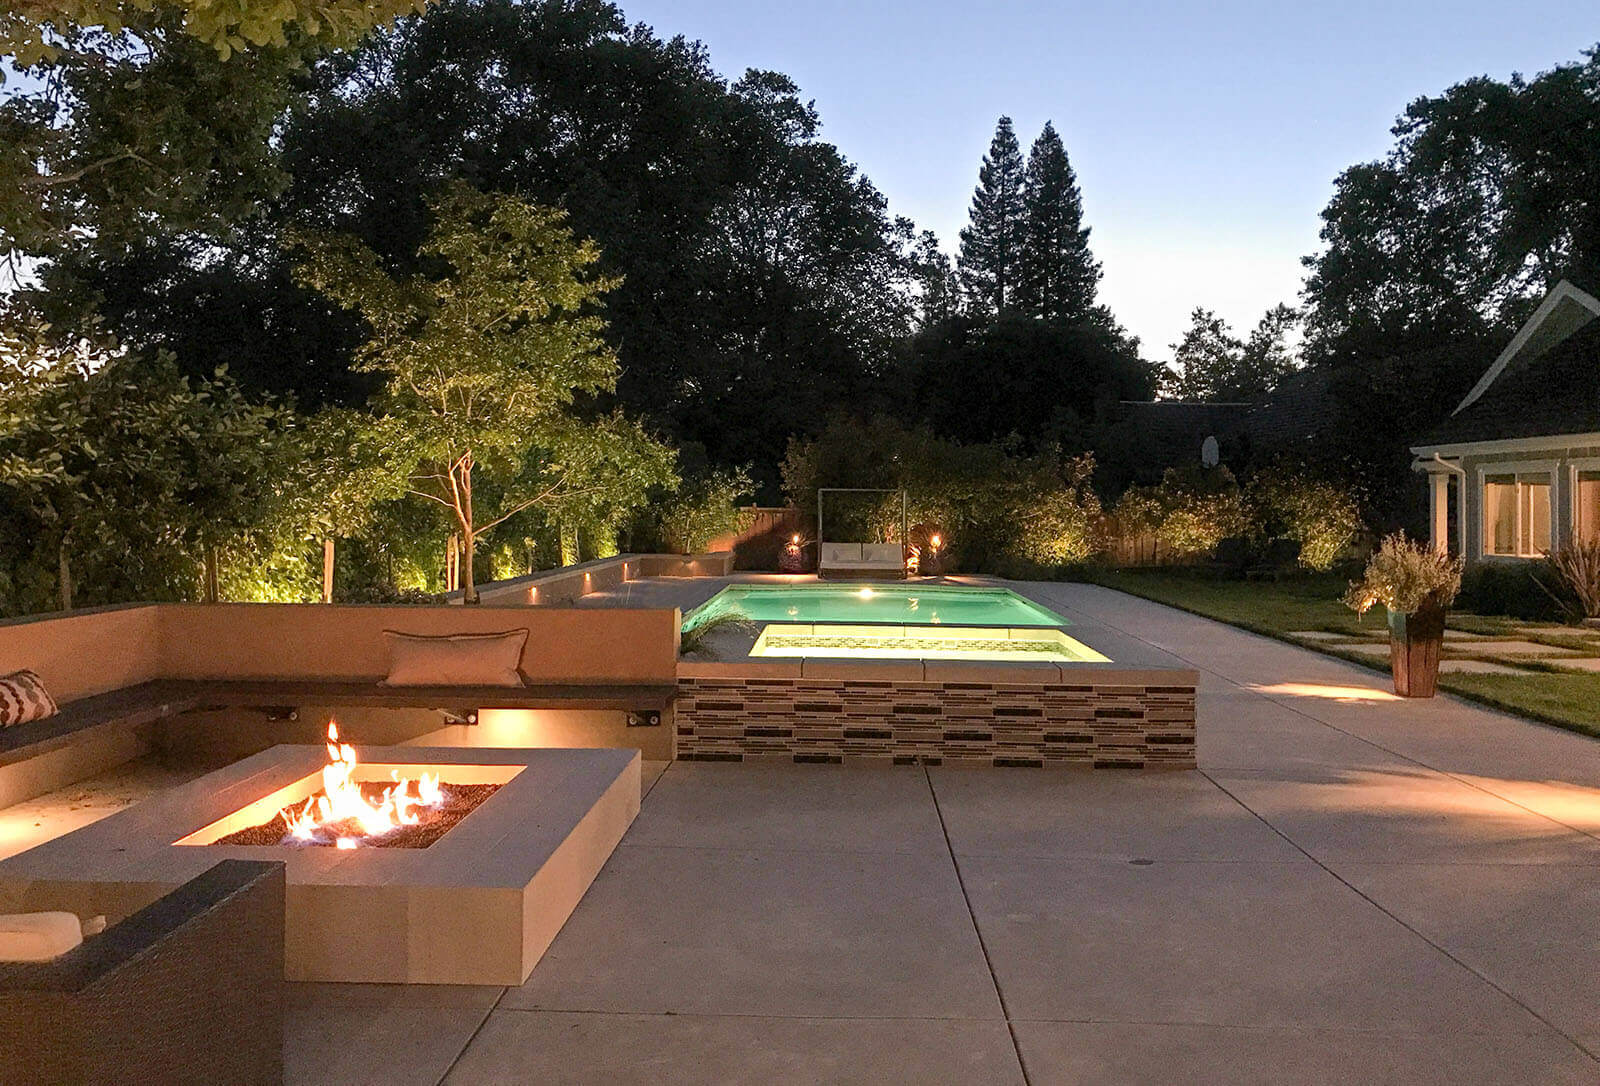 Illuminate - well-lit pool and Jacuzzi with rectangular fire pit, and lights under wrapped seating section, and lights coming from some flower pots as well